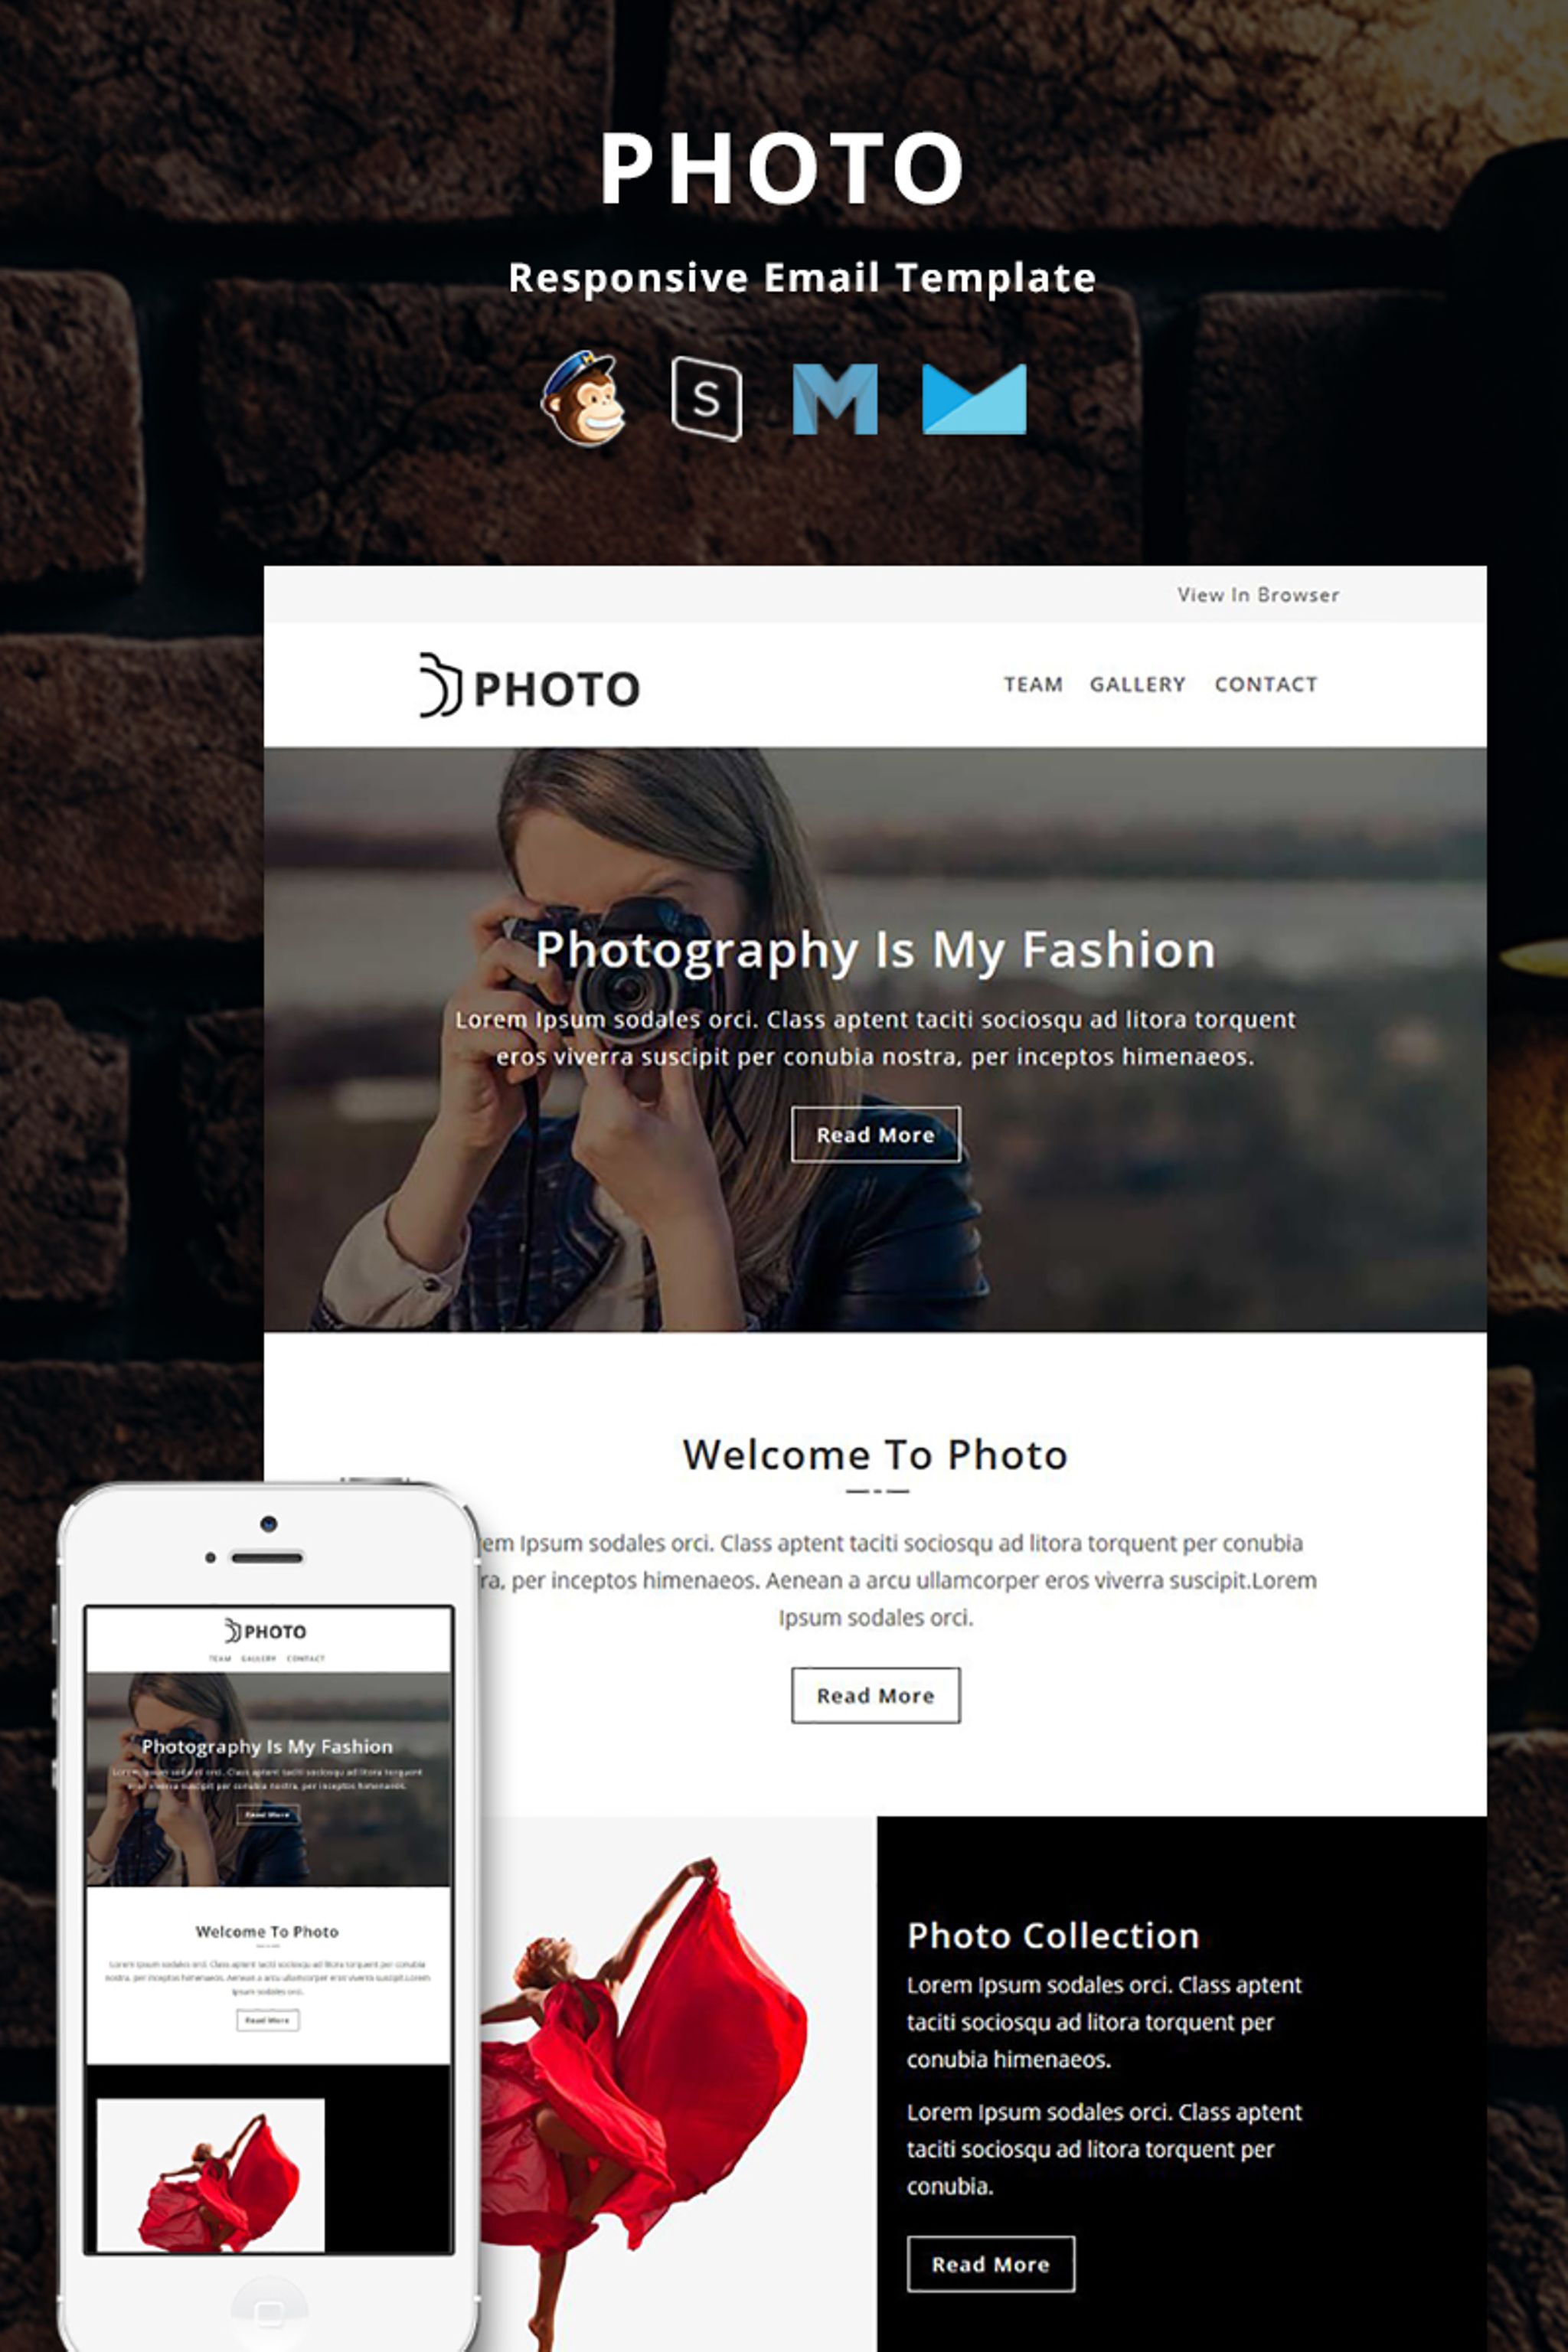 Photo - Responsive Email Newsletter Template